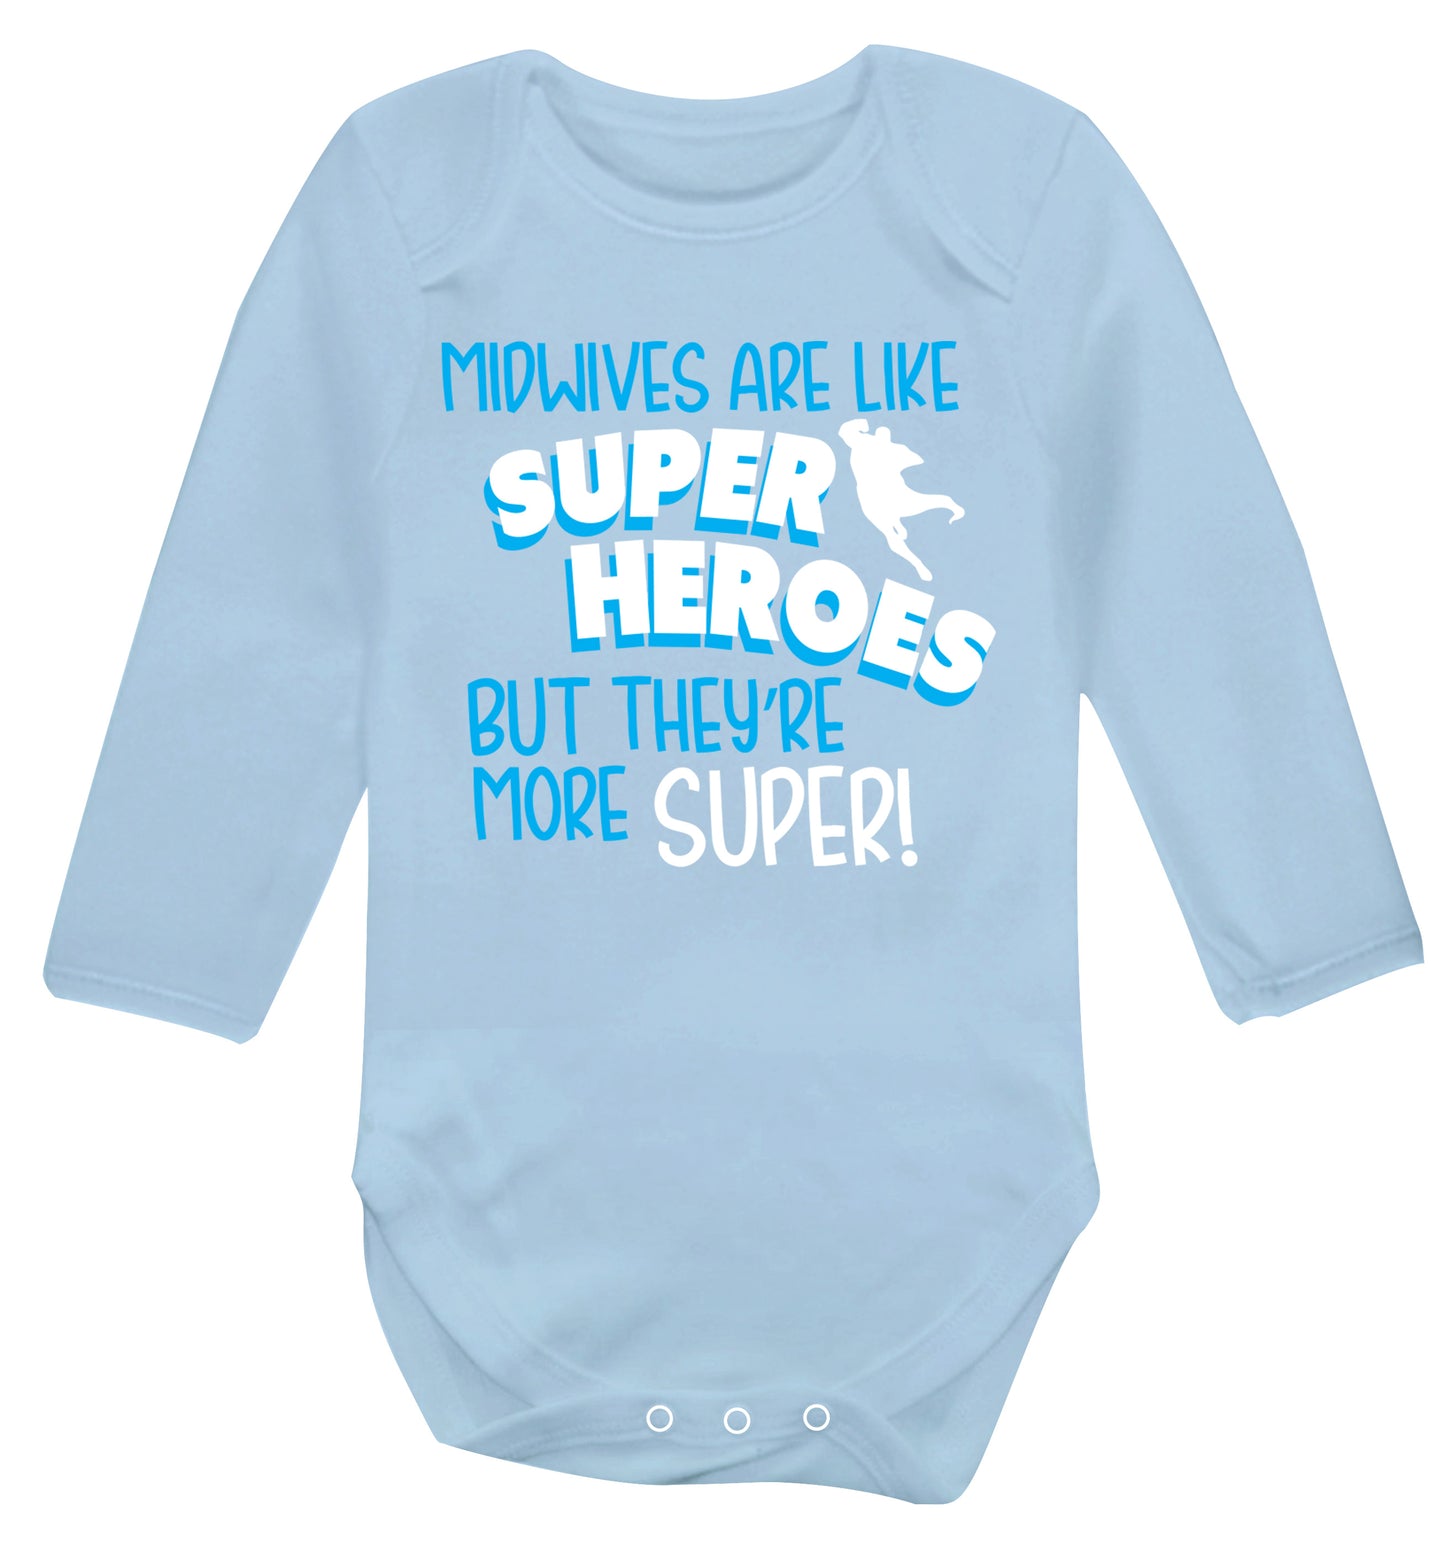 Midwives are like superheros but they're more super Baby Vest long sleeved pale blue 6-12 months